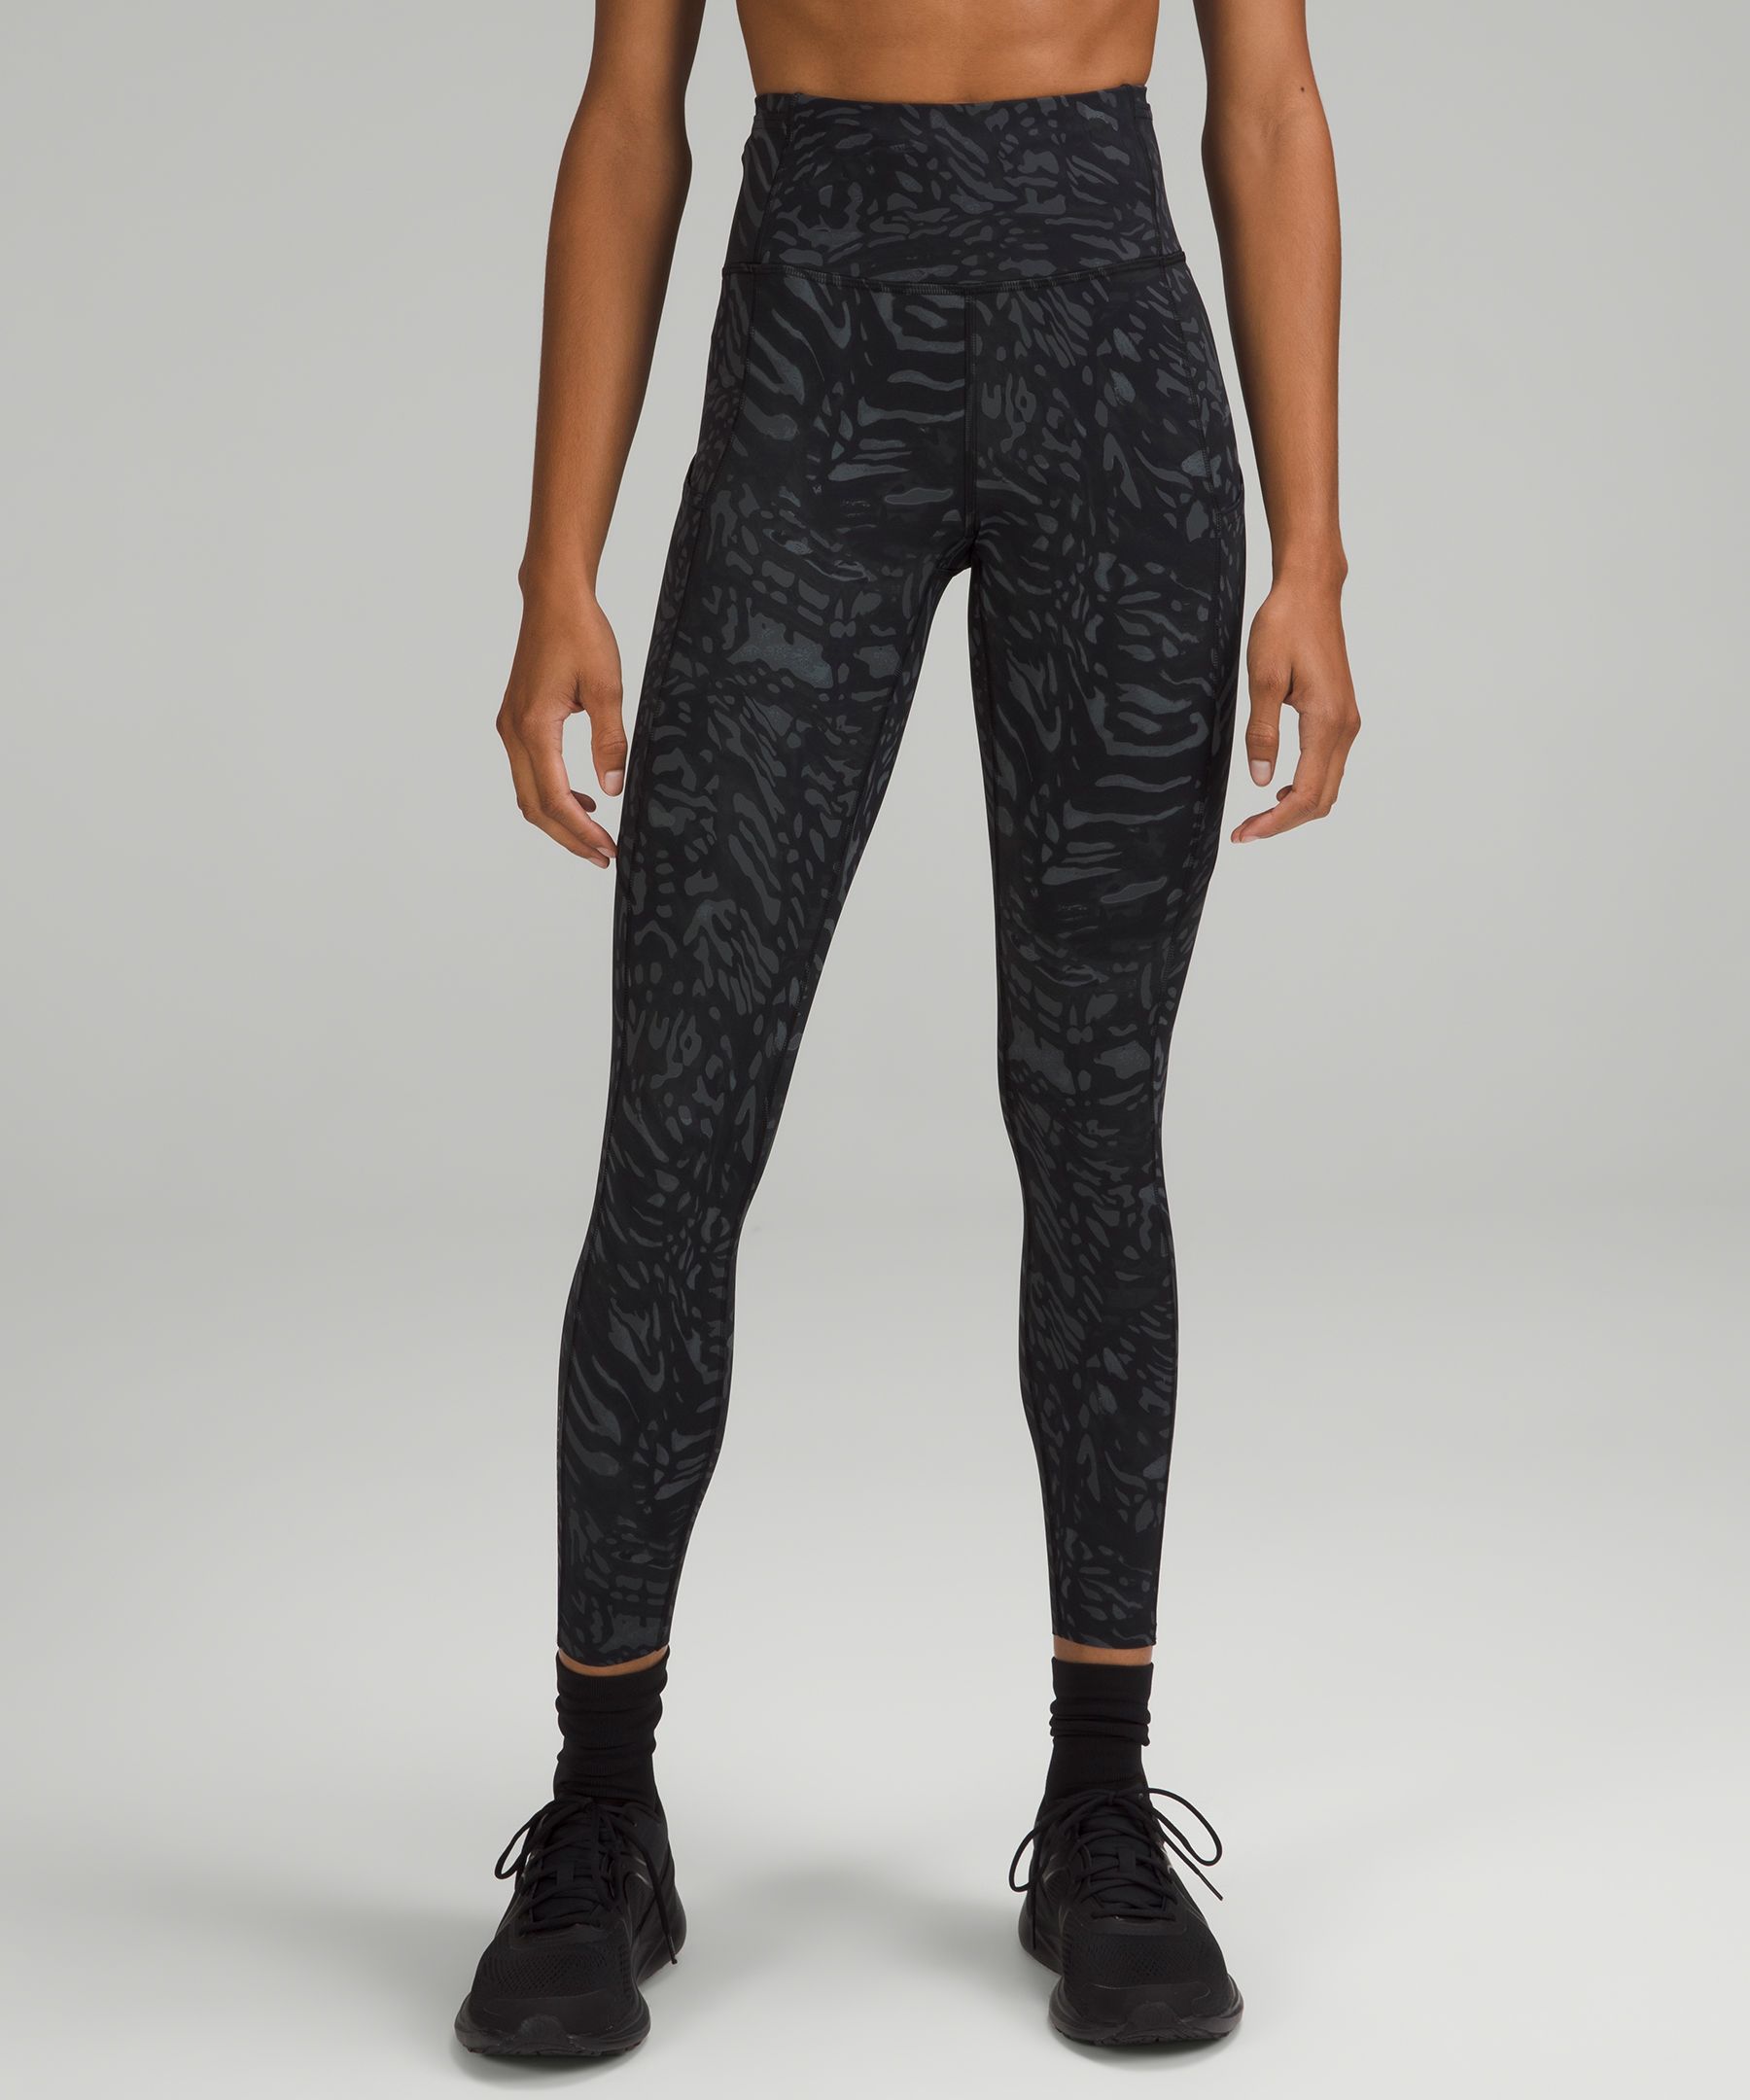 Lululemon formation camo deep coal multi in movement tight, size 2